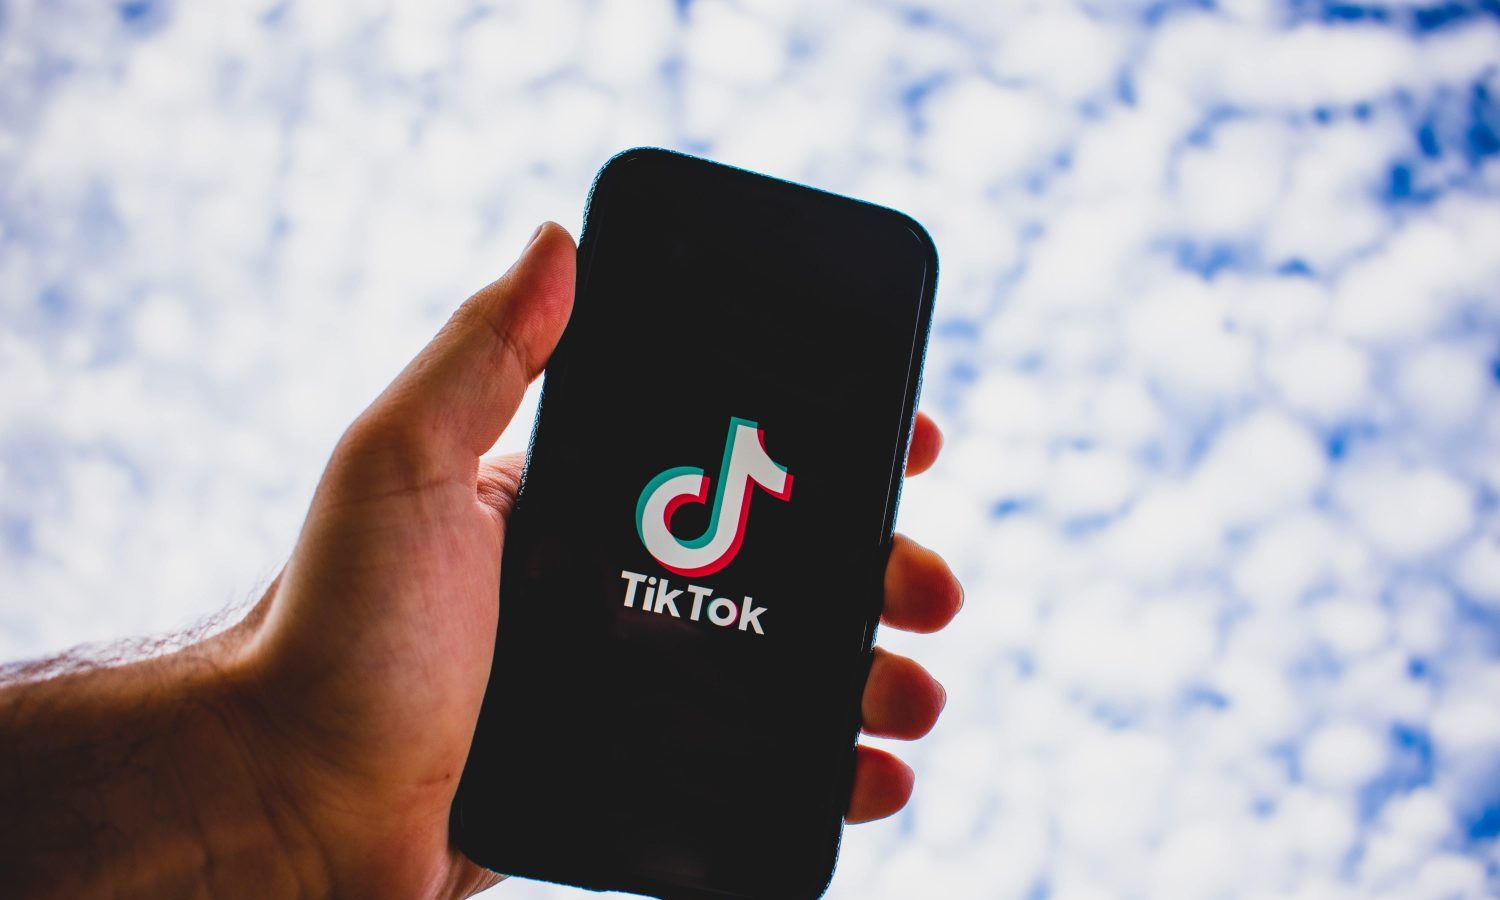 TikTok Is Valuable For The CBD Industry